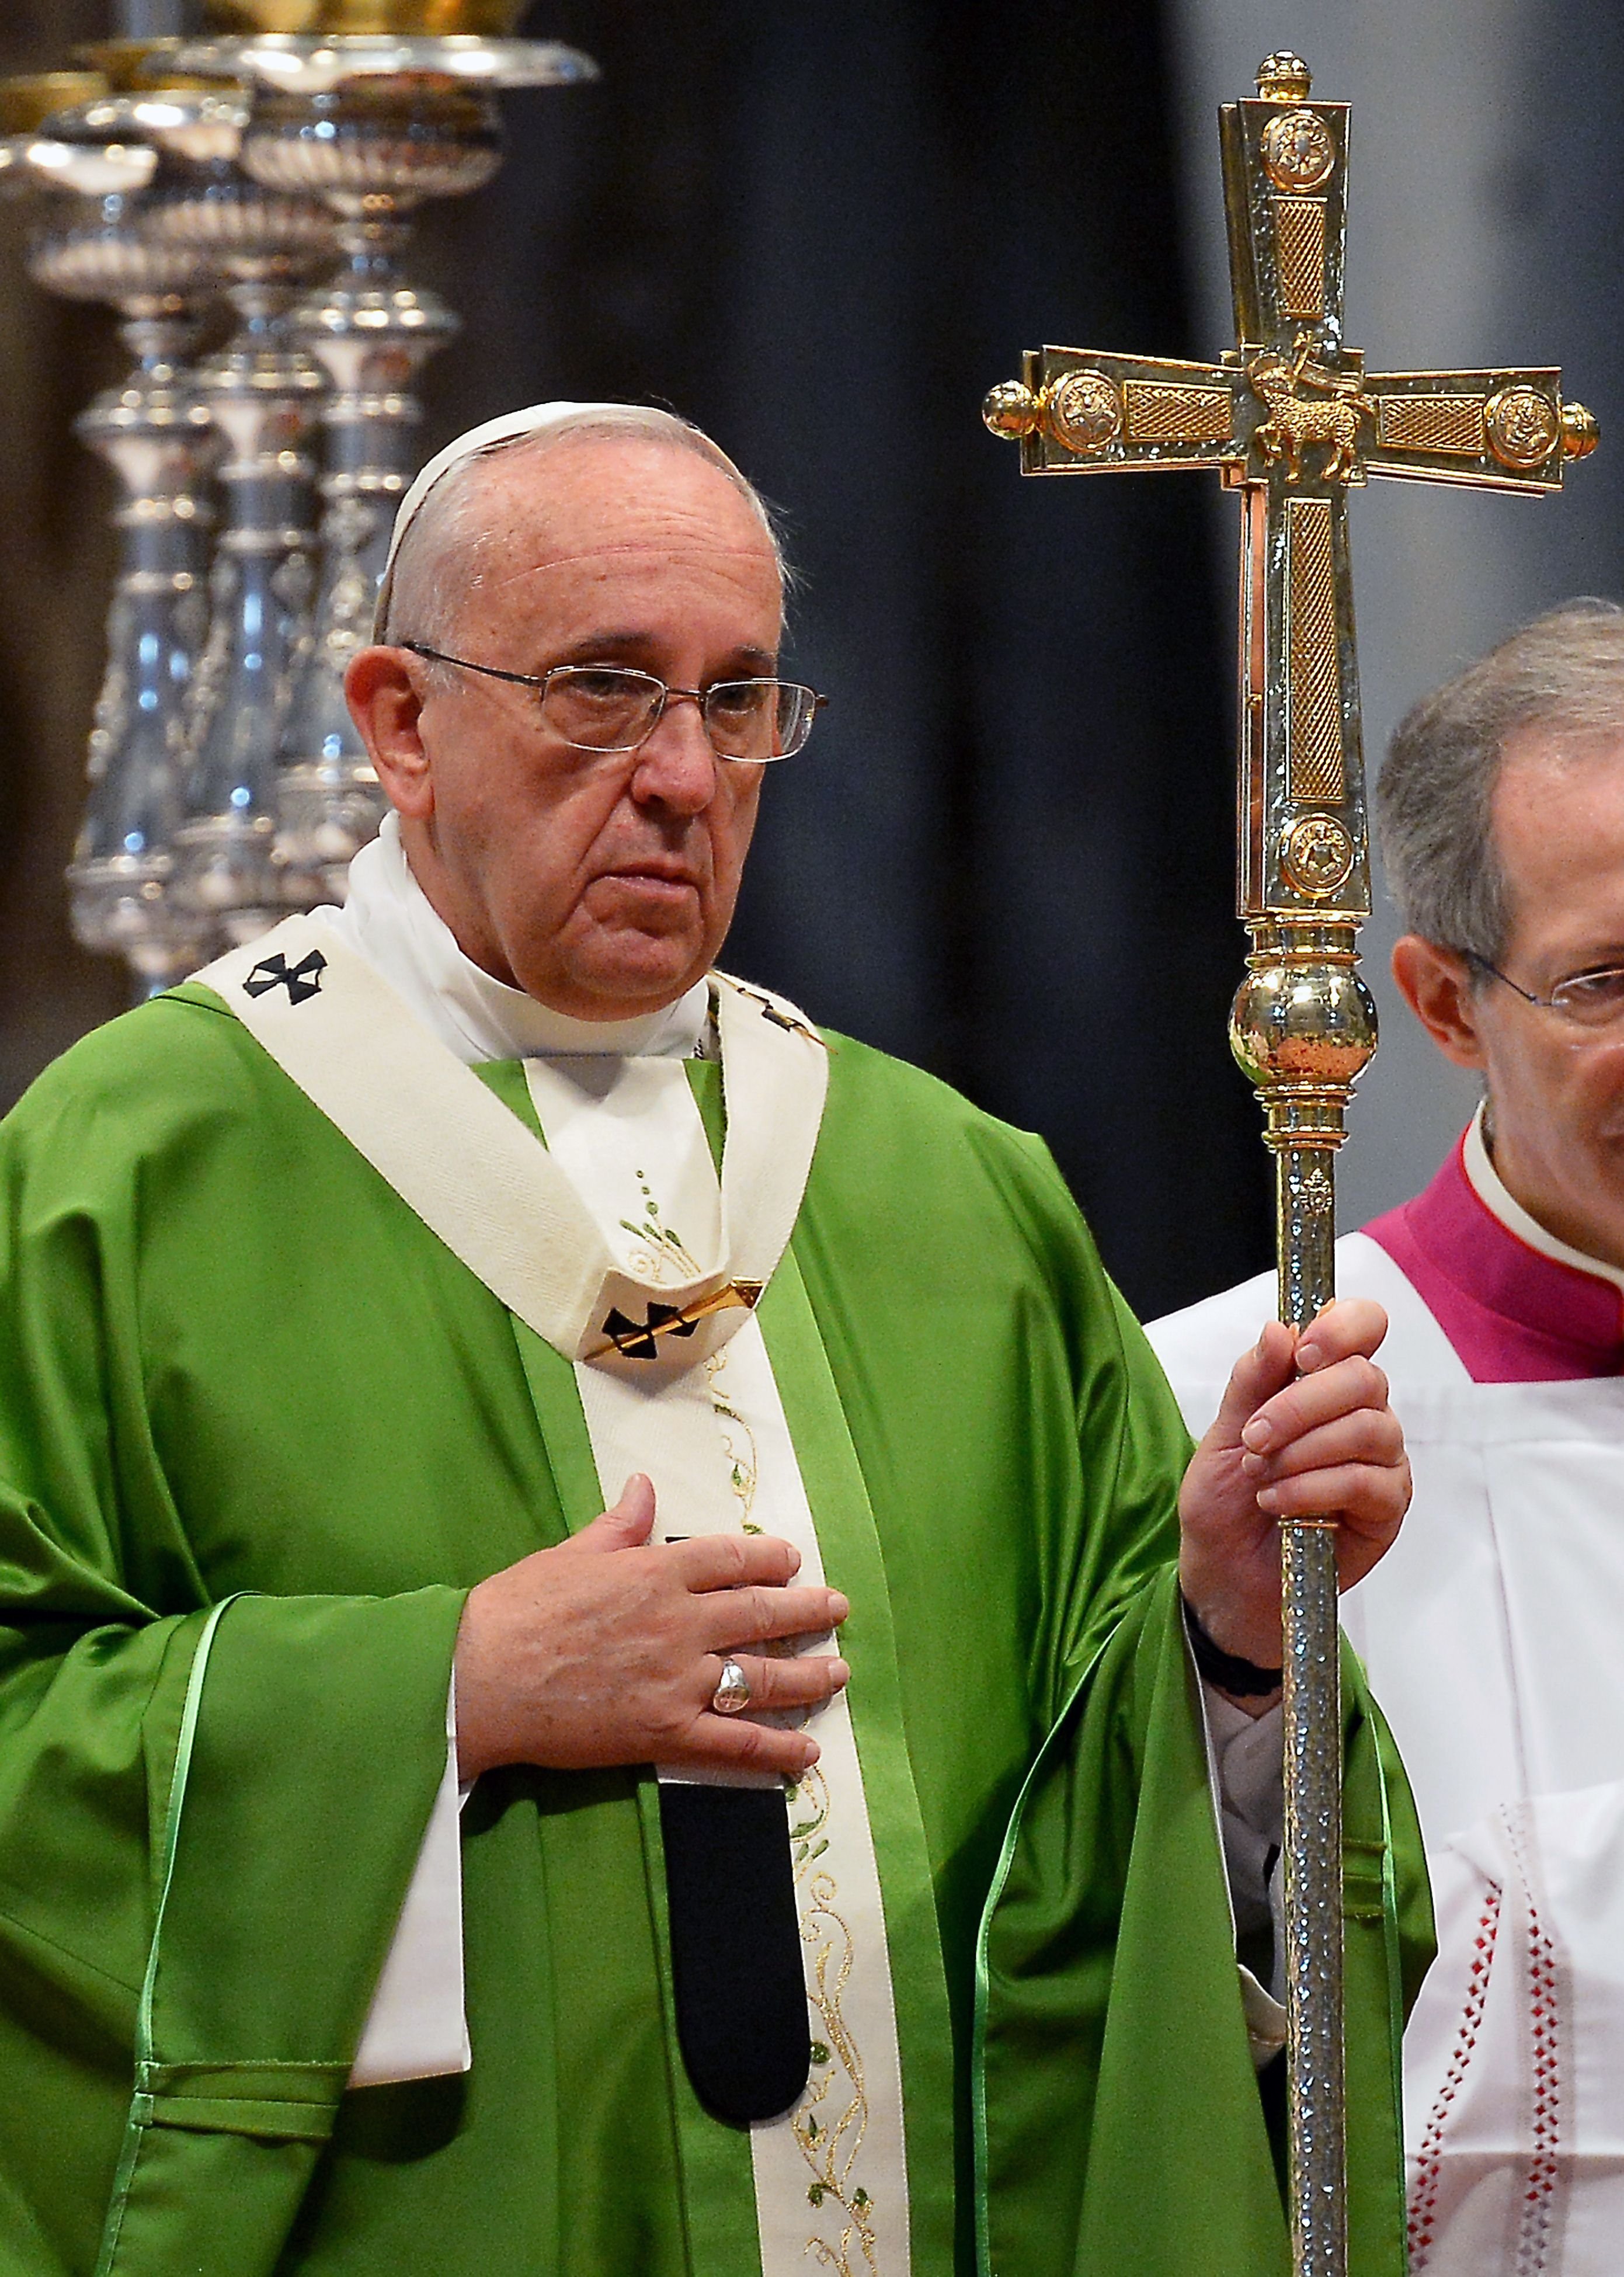 Pope Francis leads a mass honouring the canonisation of two Canadian saints in St. Peter's basilica at the Vatican on Oct. 12, 2014. (Vincenzo Pinto—AFP/Getty Images)